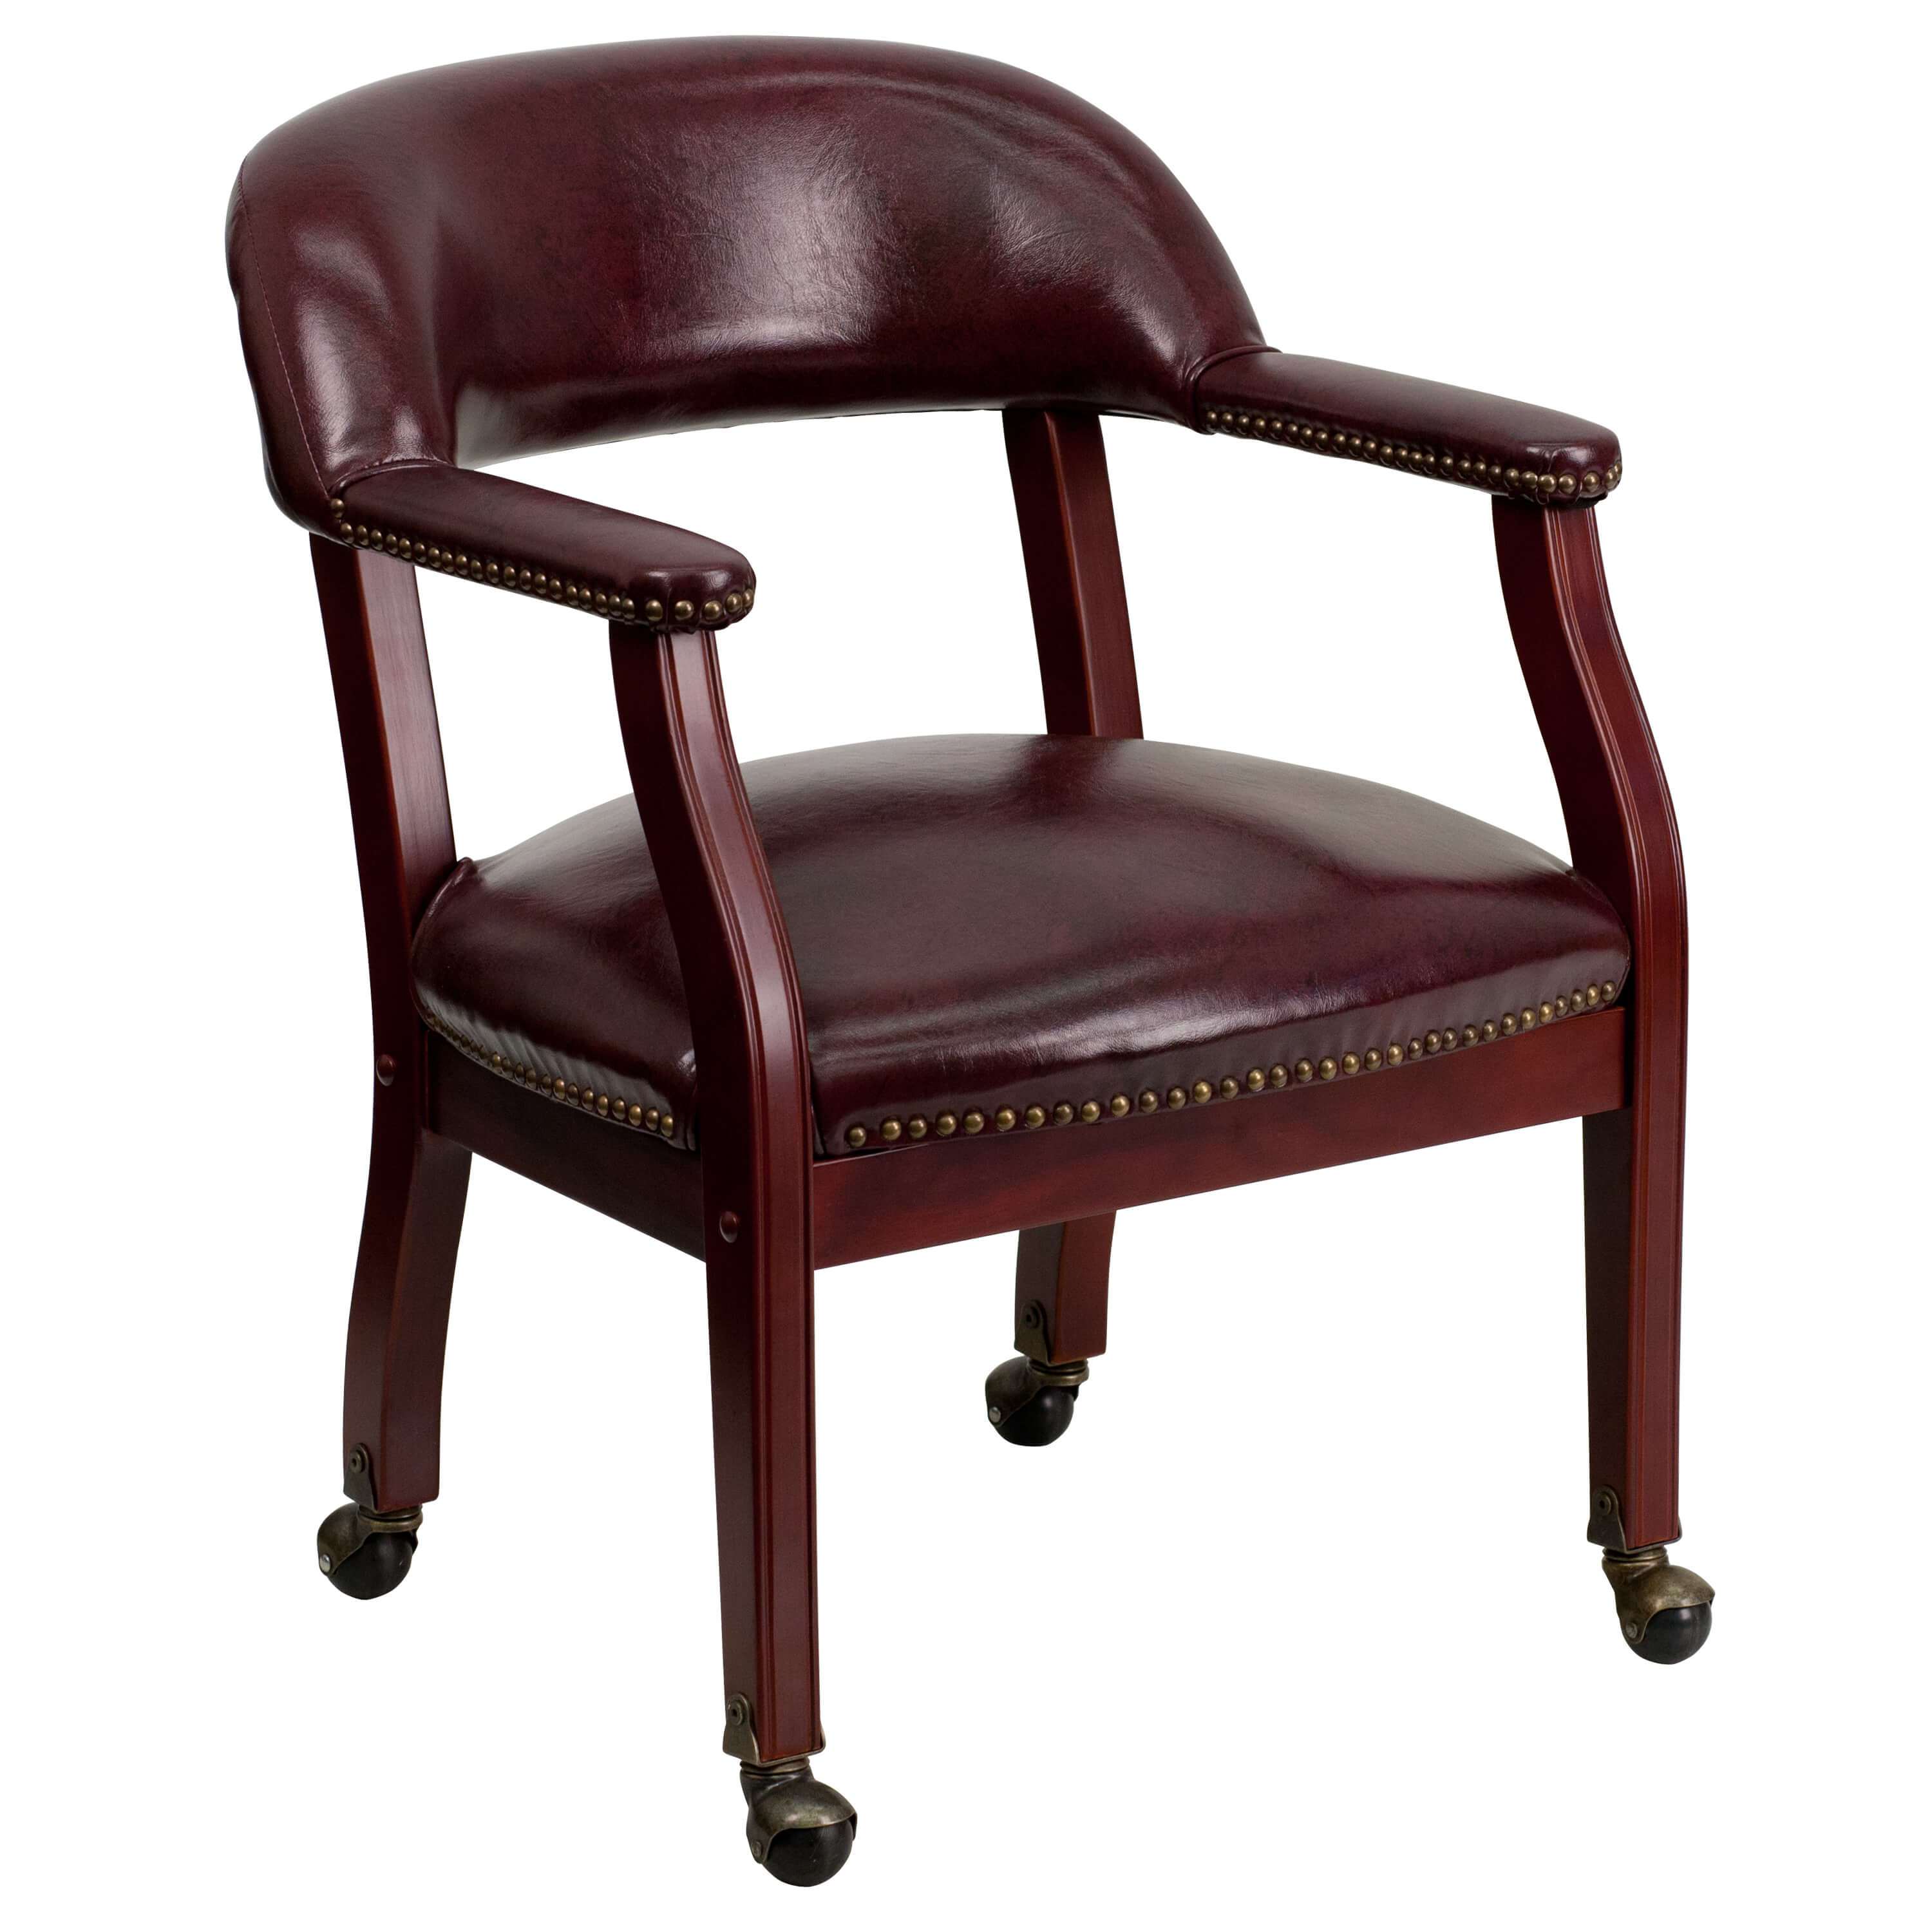 Side chairs with arms CUB B Z100 OXBLOOD GG FLA